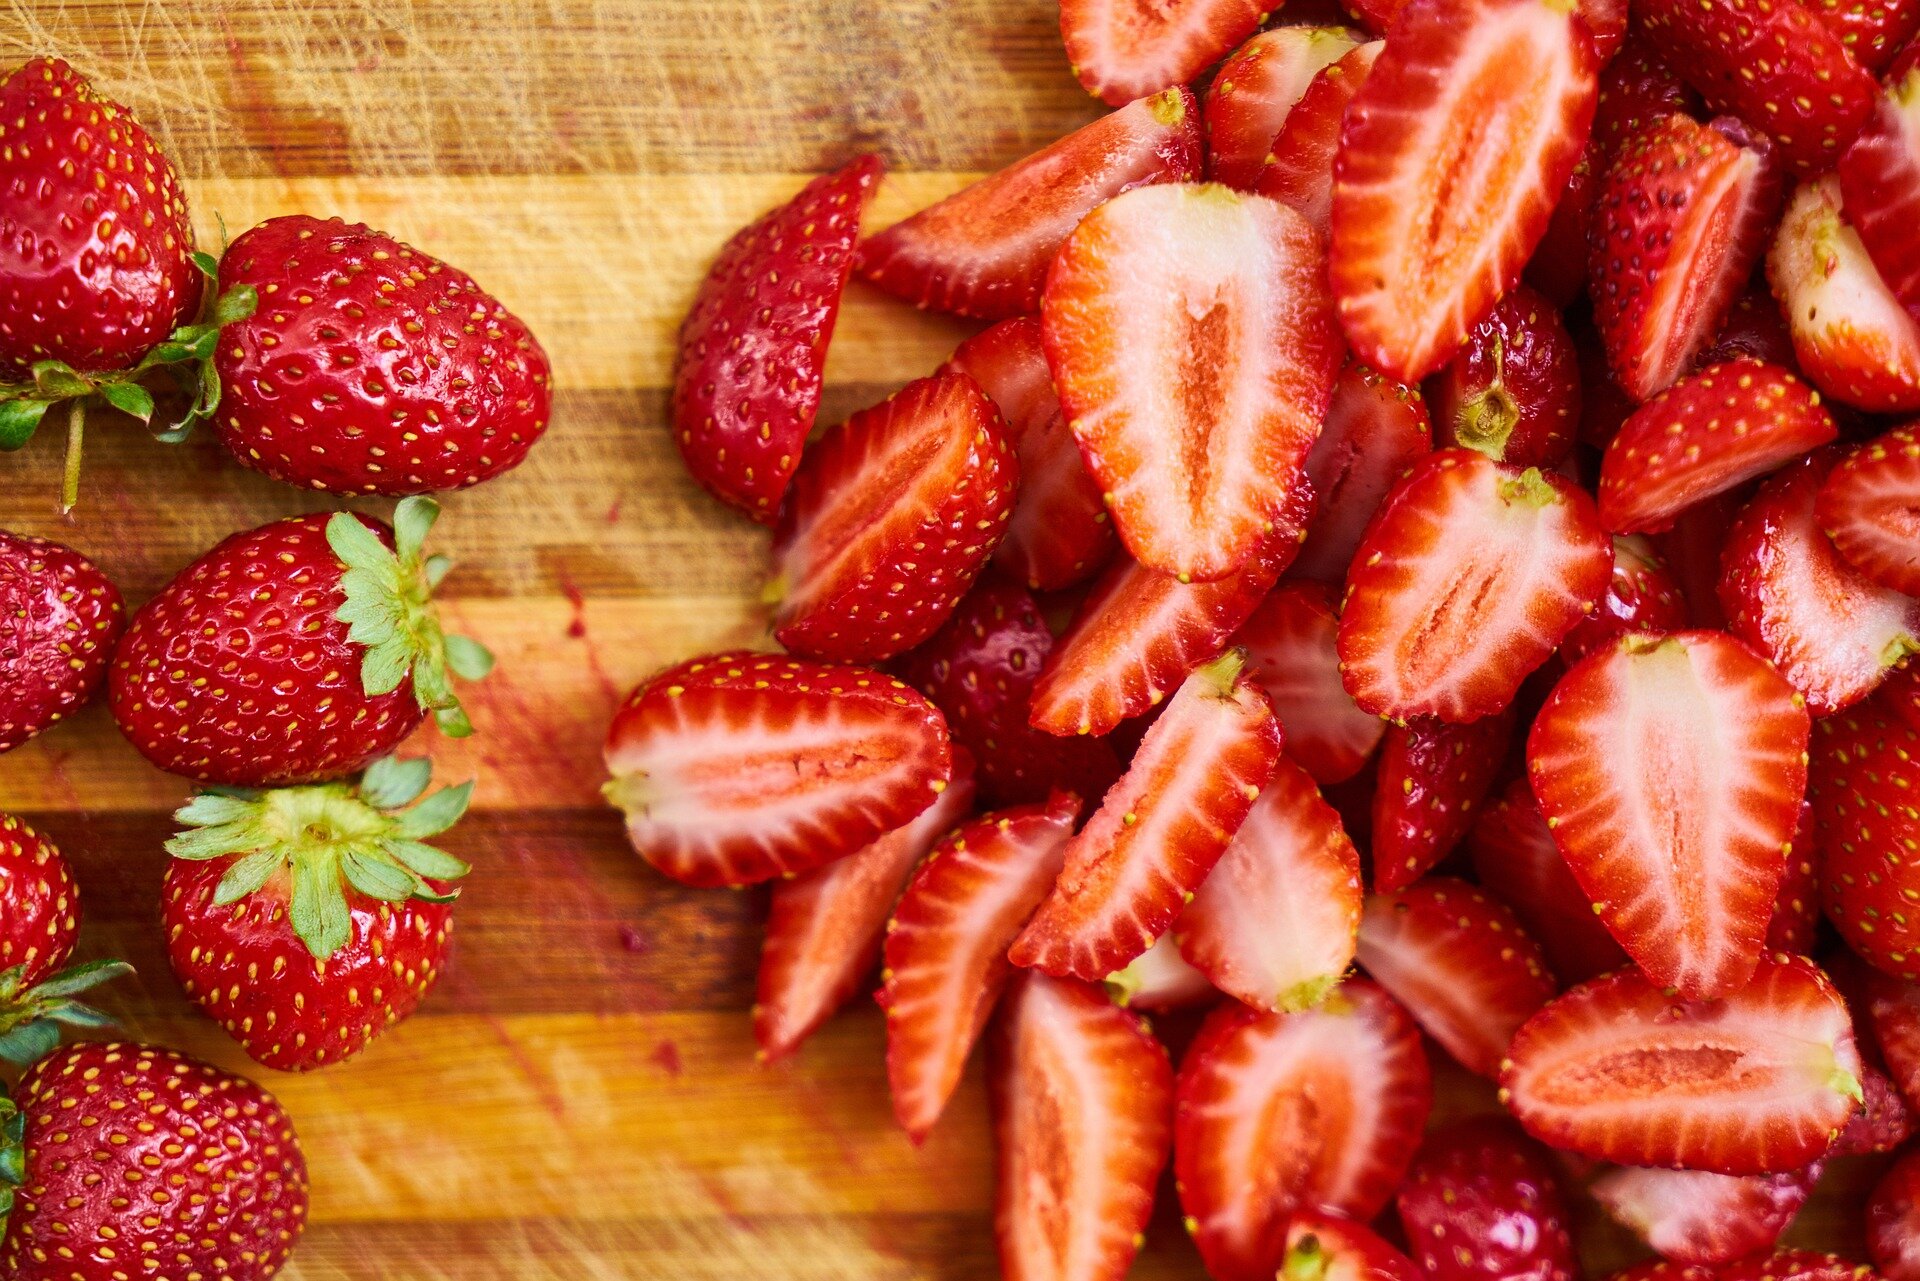 Can strawberries mitigate Alzheimer's risk? Recent study suggests a  possibility